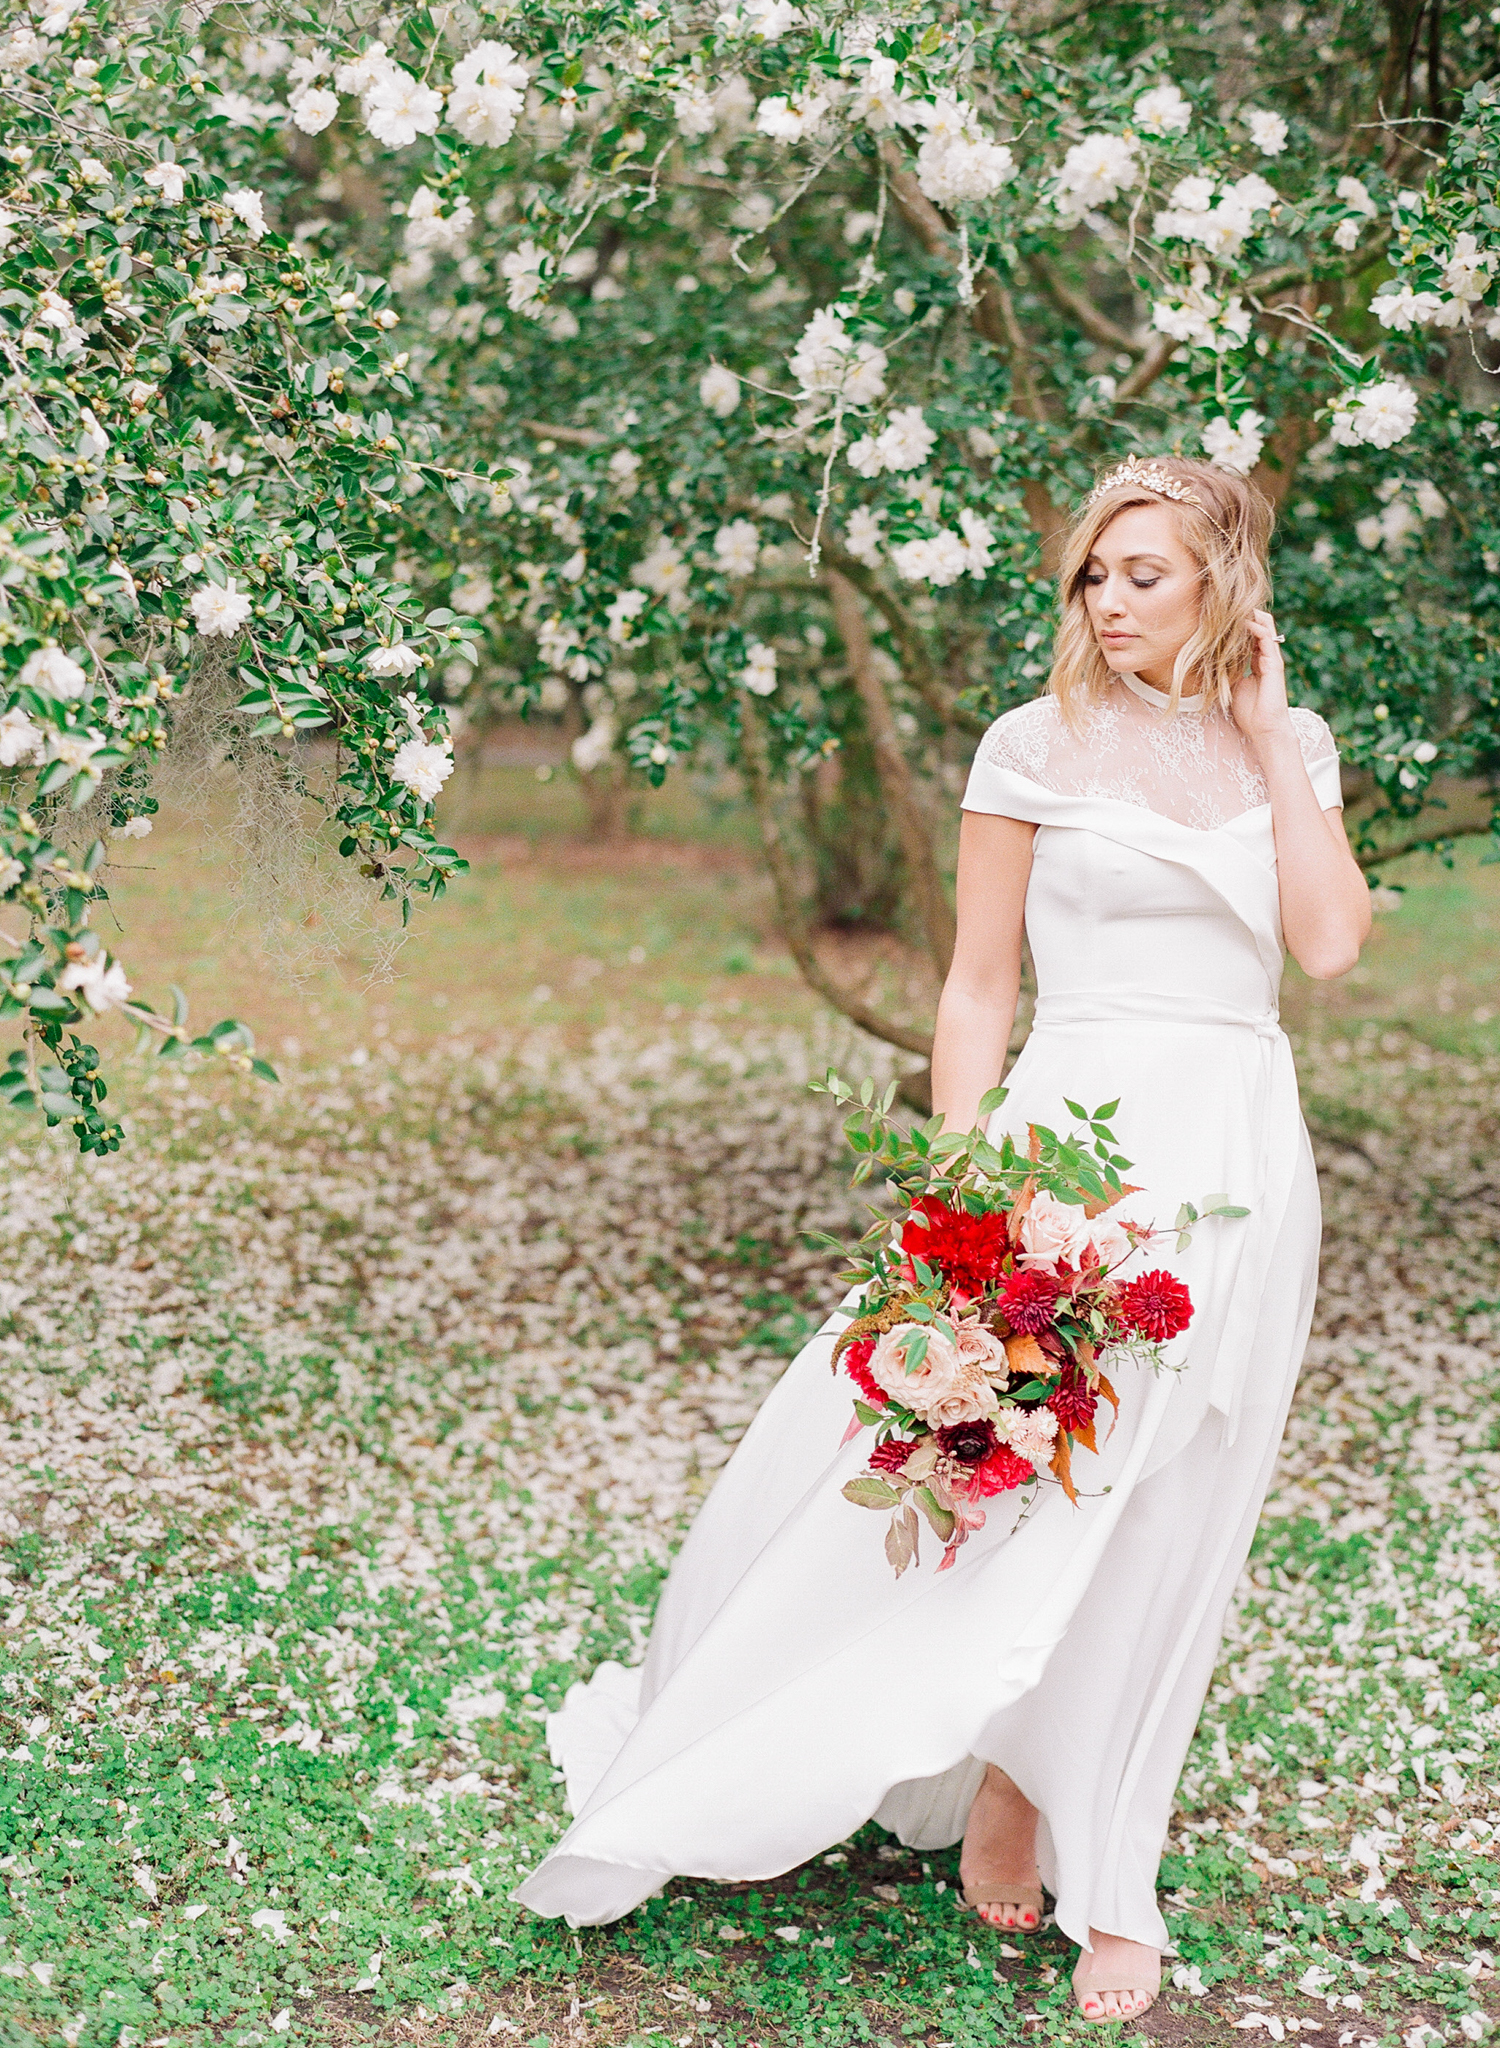 Legare Waring House Wedding Photography | Charleston Wedding Photographer | Charleston Film Photographer | Molly Carr Photography | The Petal Report | Emily Kotarski Bridal | Bride with Short-Sleeved Wedding Dress and Red Bouquet